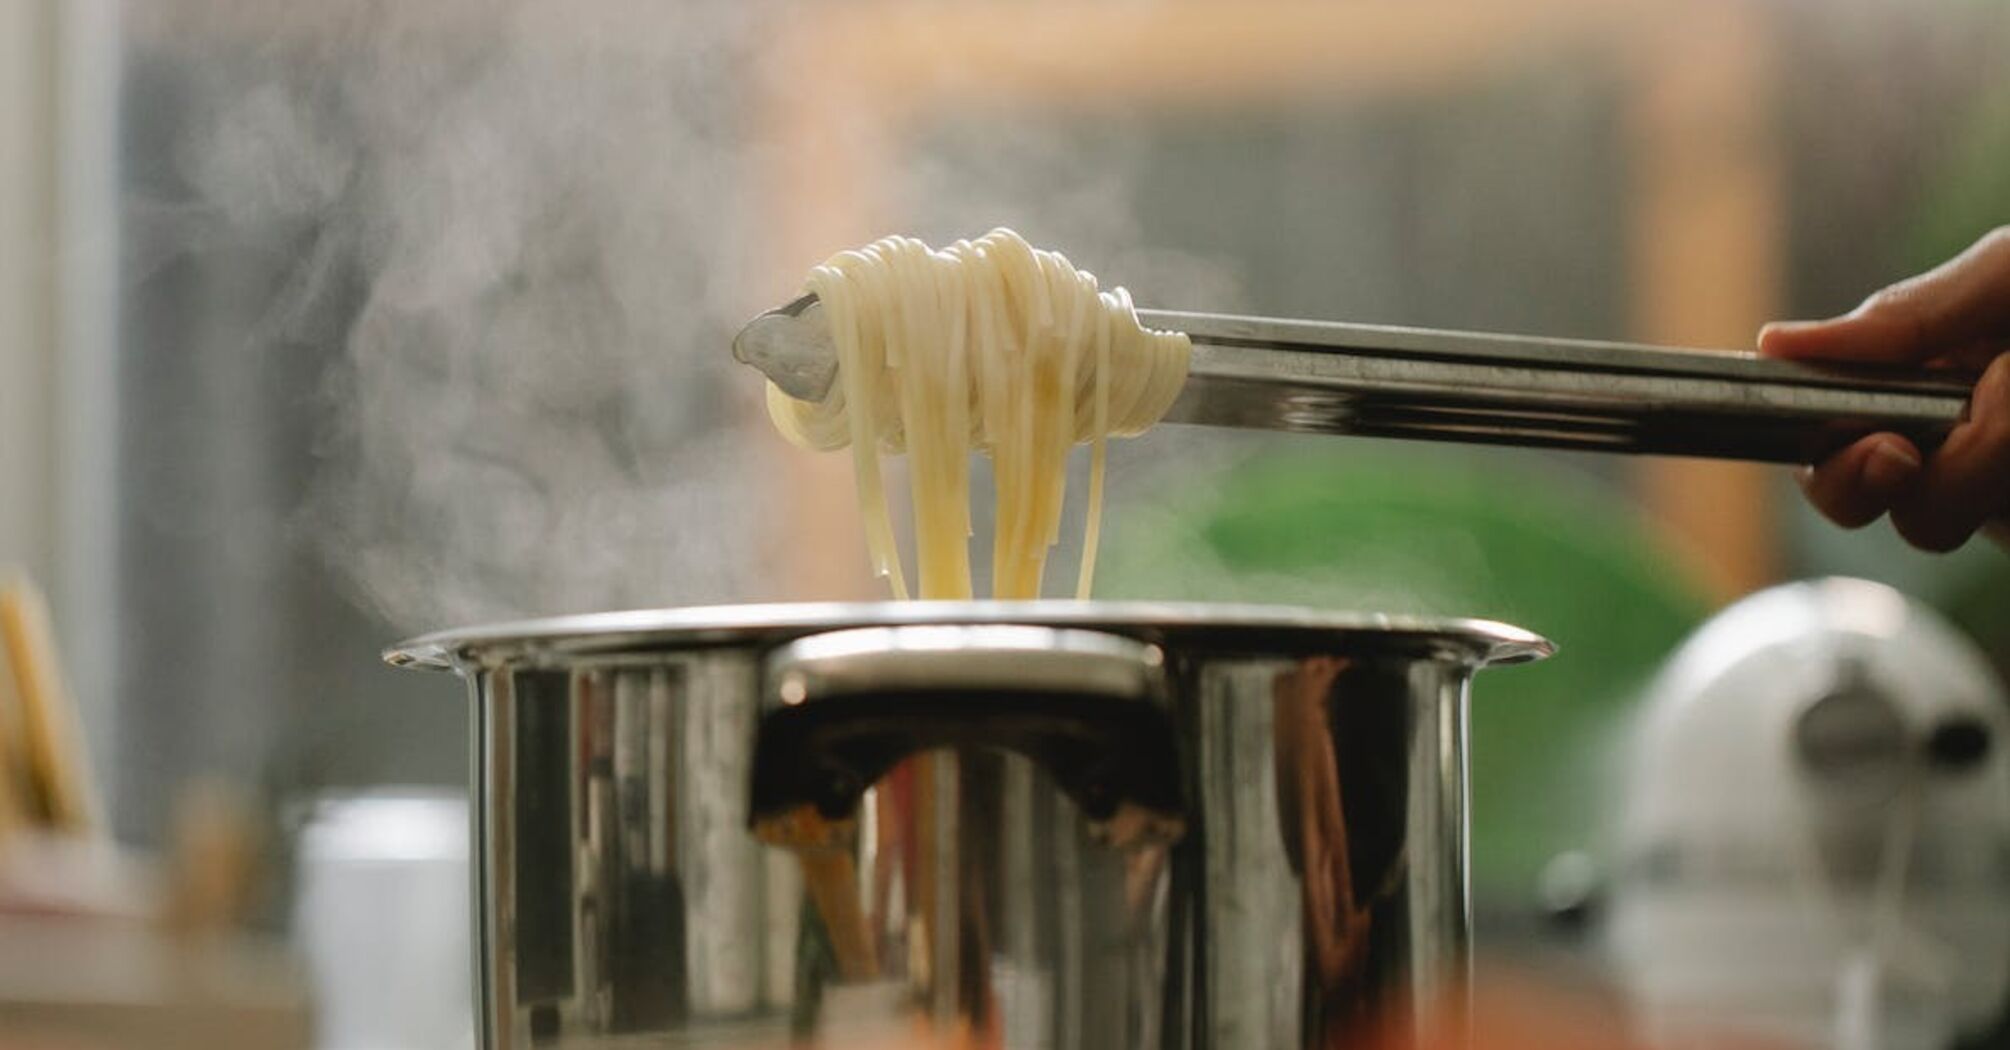 Experts explain why it's a bad idea to pour pasta water down the sink